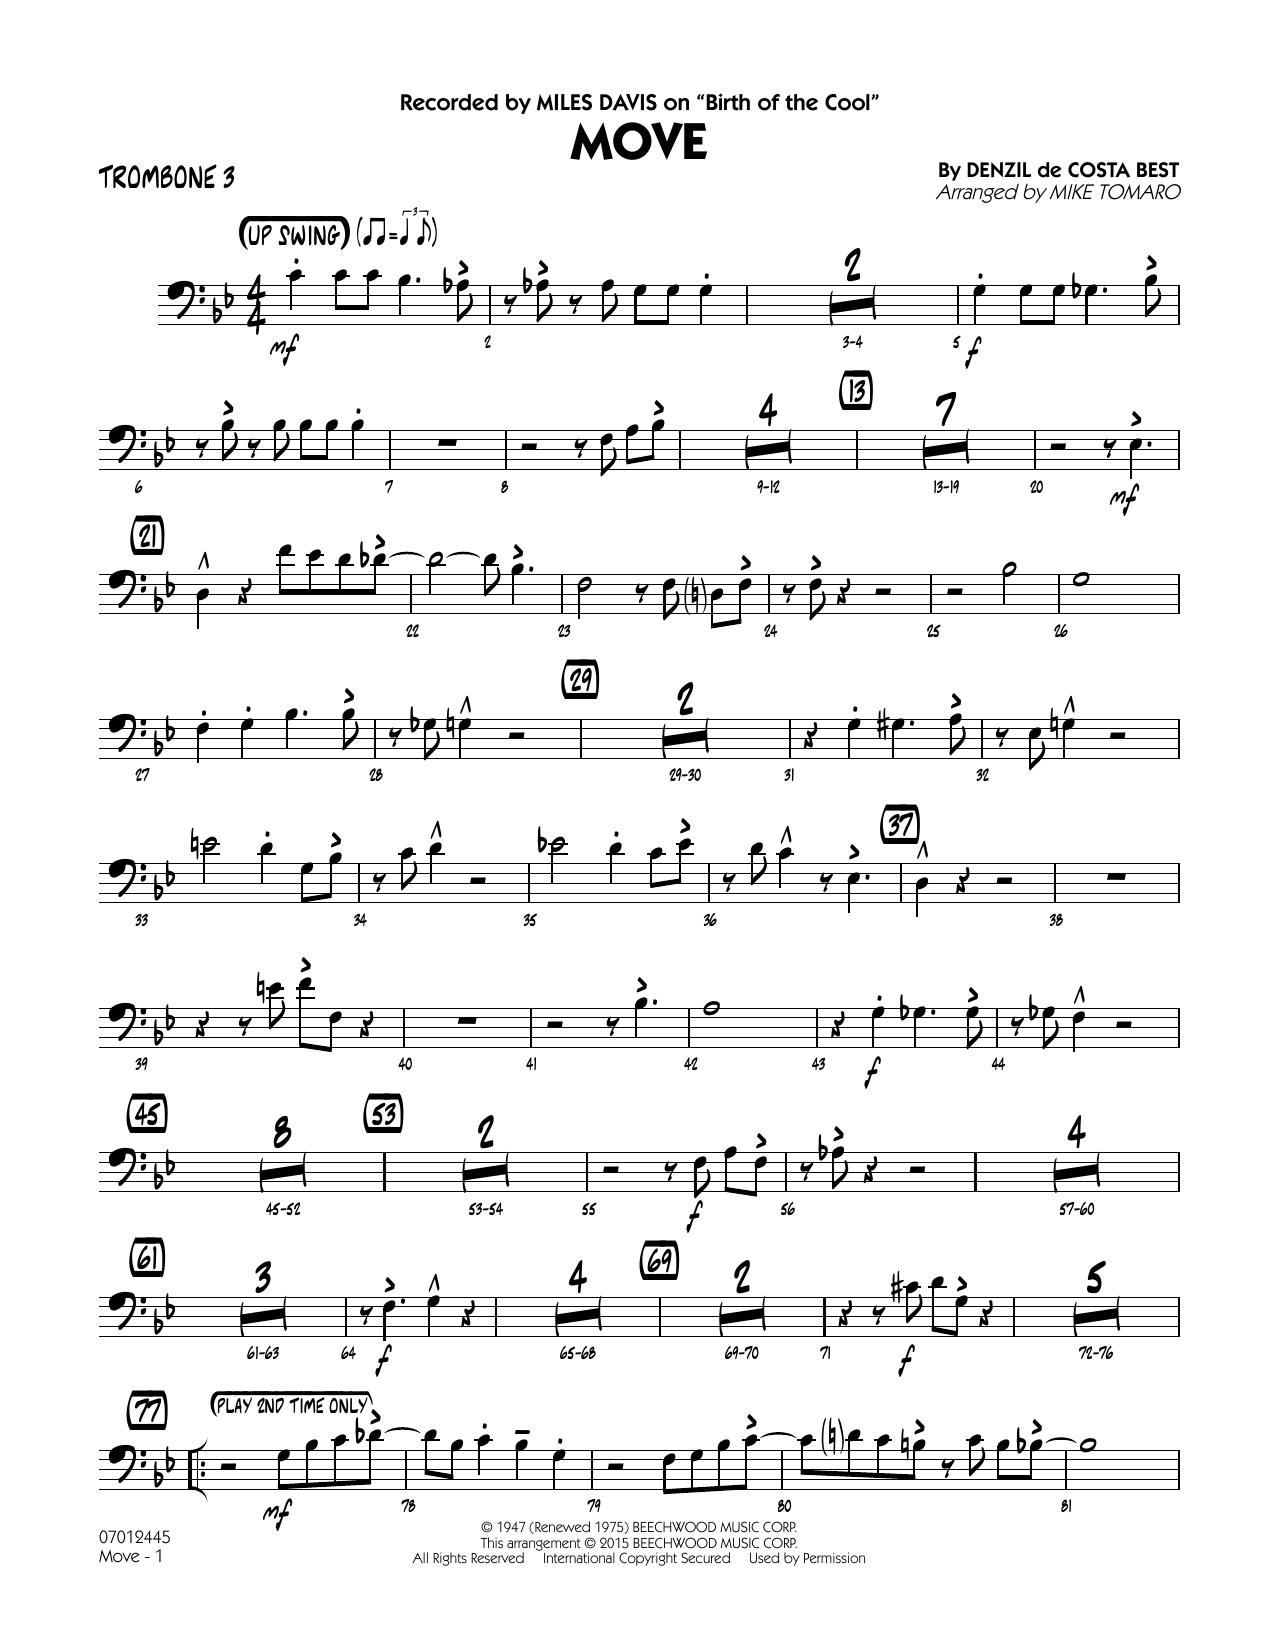 Mike Tomaro Move - Trombone 3 sheet music notes and chords. Download Printable PDF.